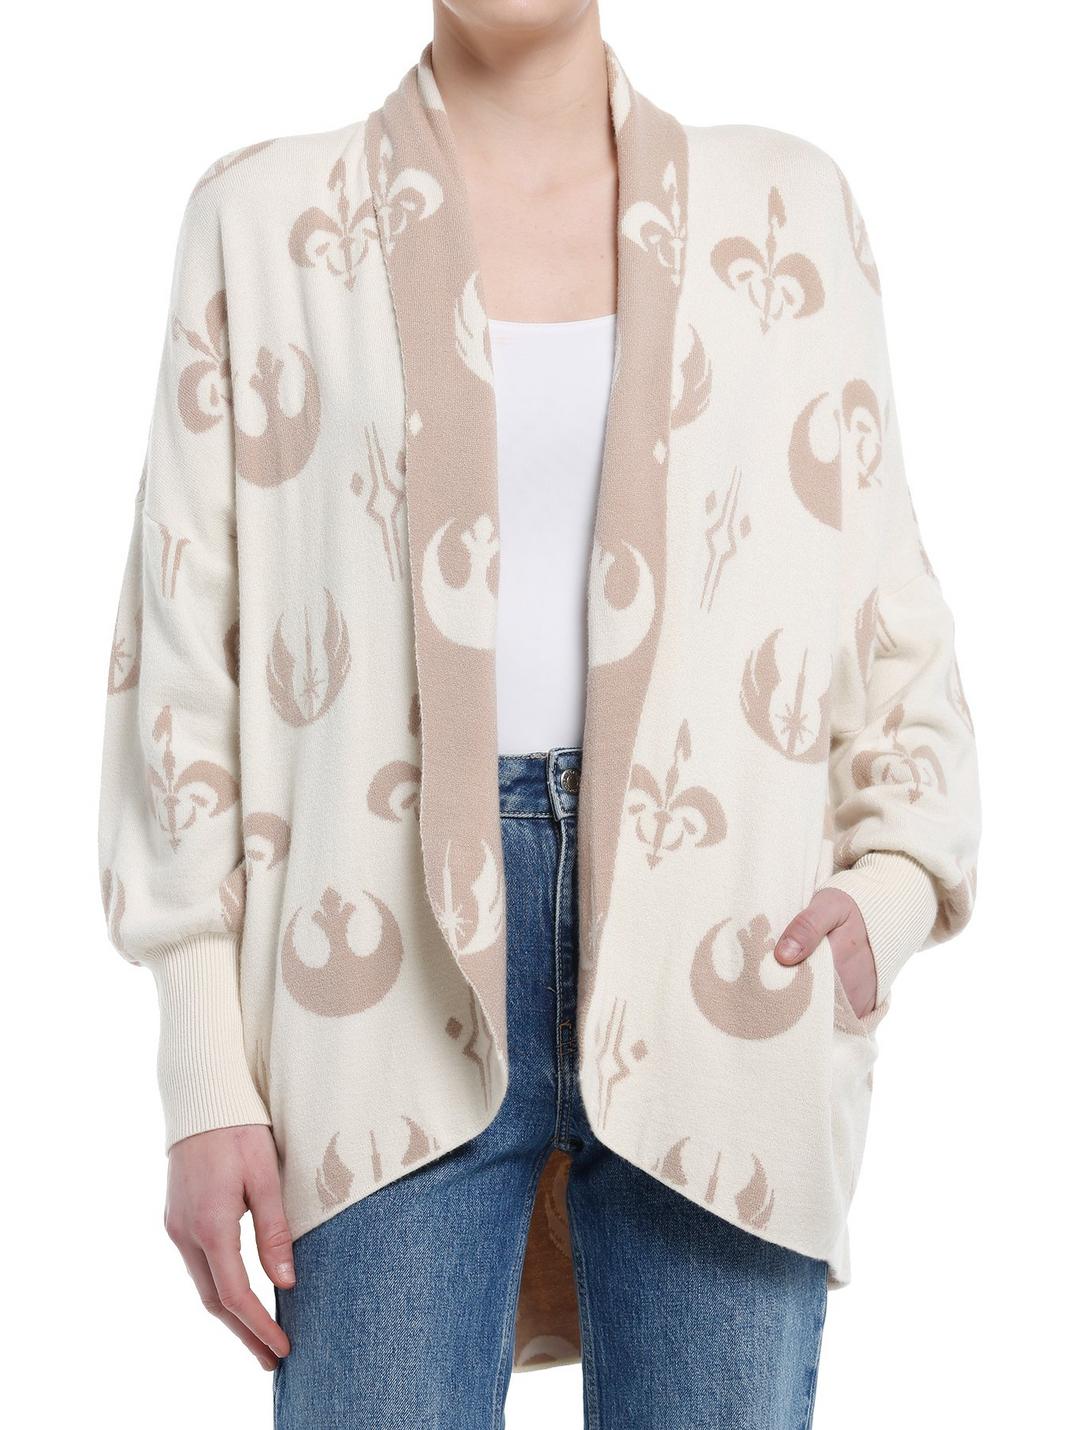 Her Universe Star Wars Icons Cardigan Her Universe Exclusive, IVORY  GOLD, hi-res